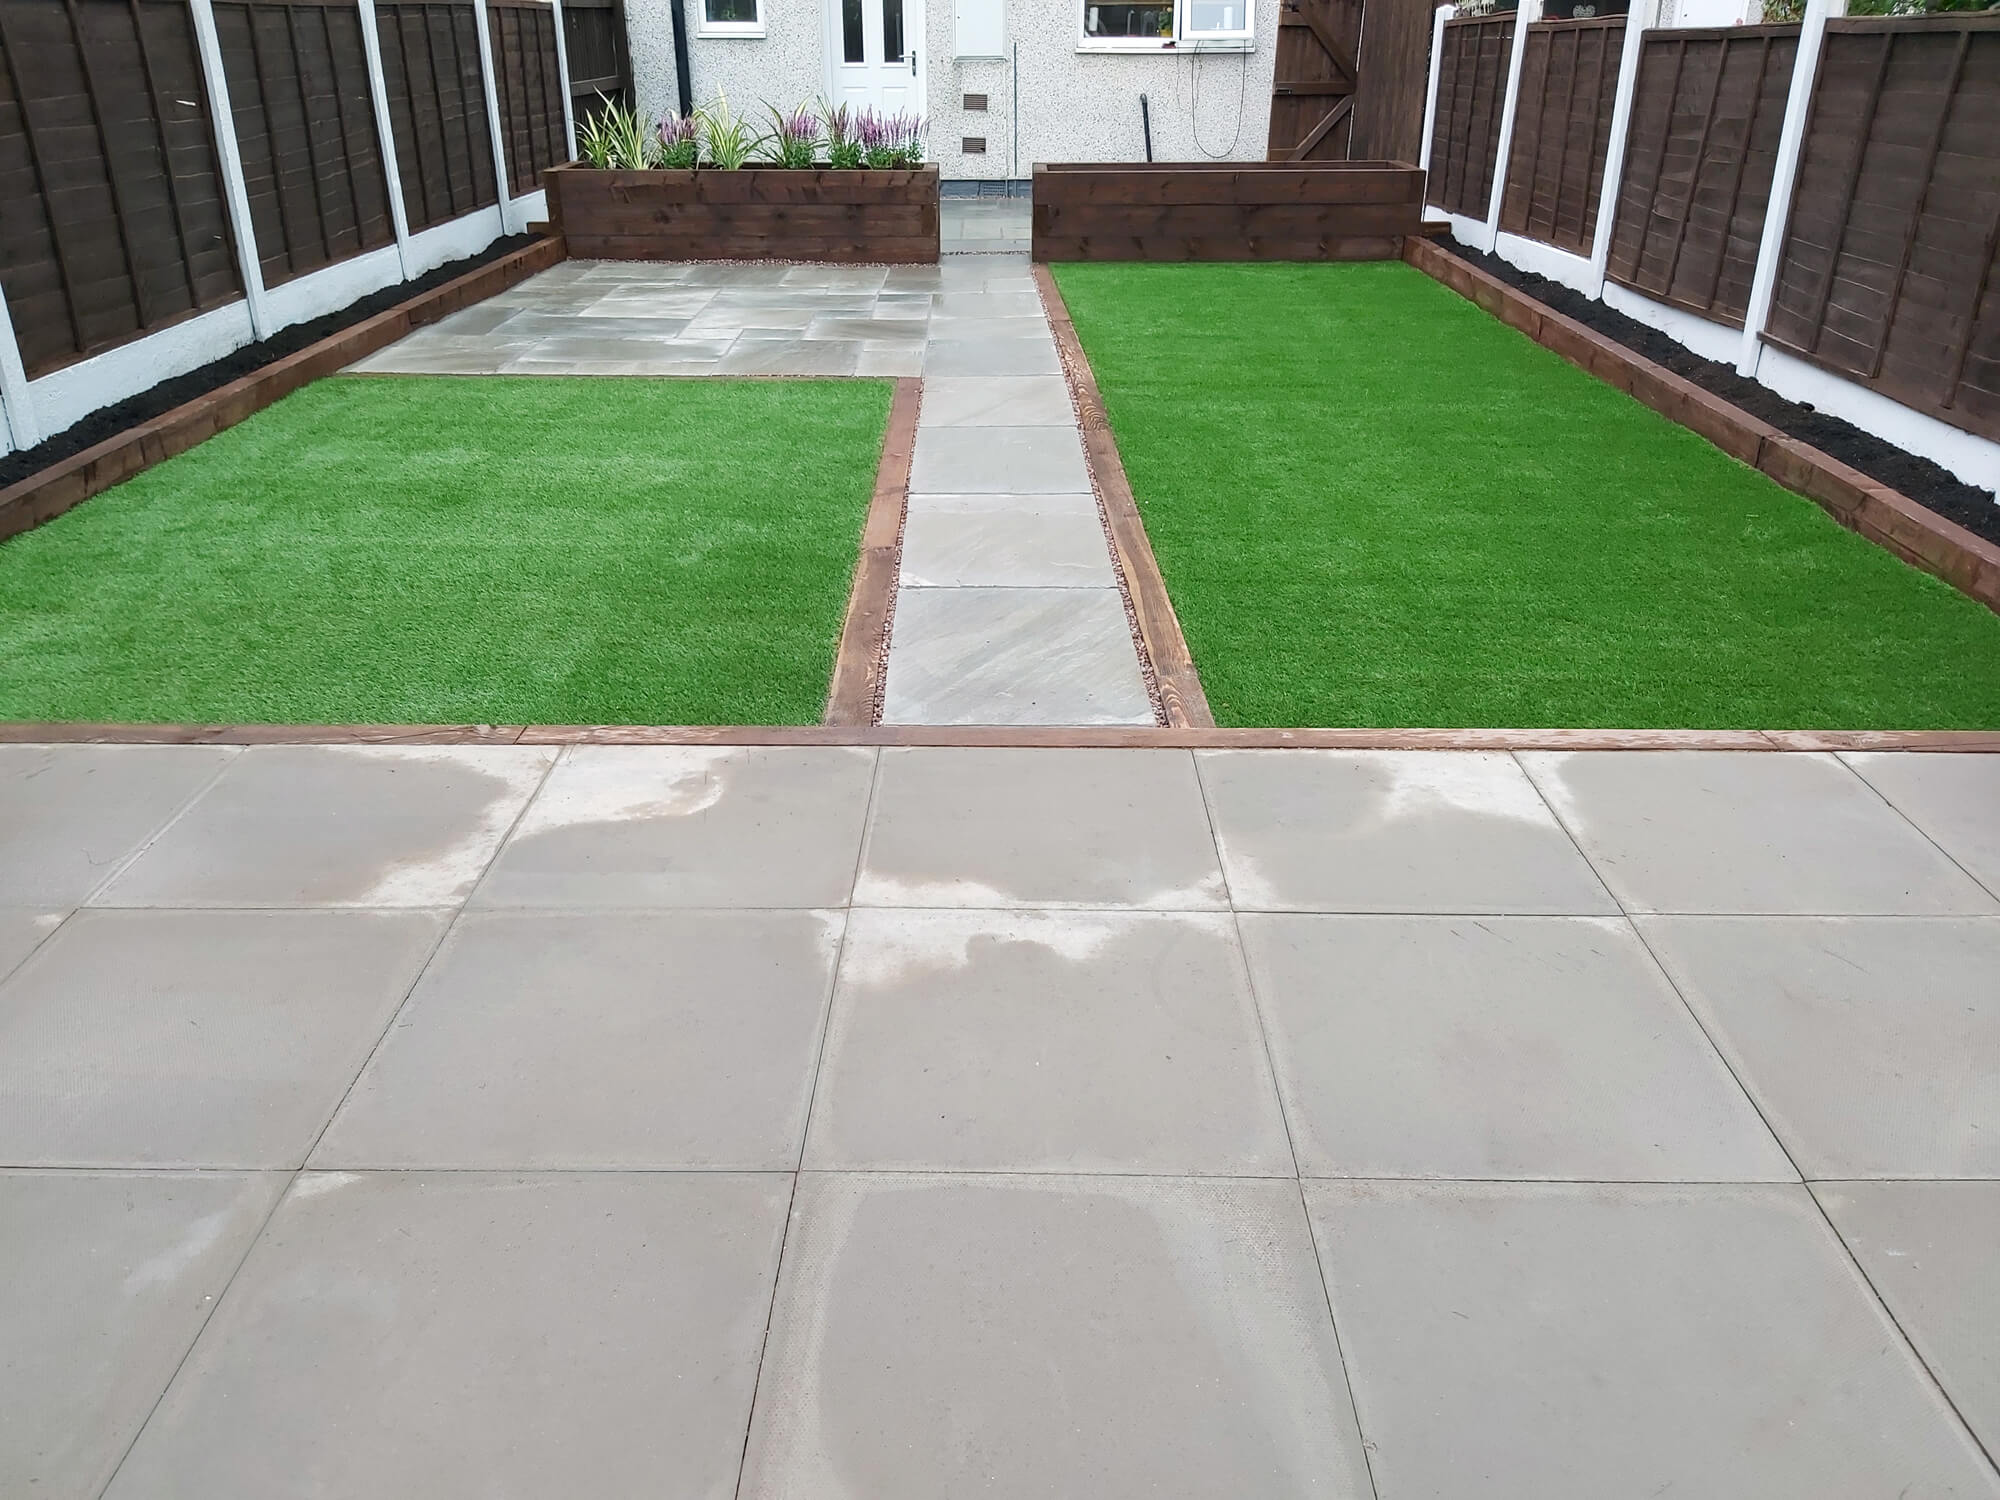 Landscaped garden, professional landscaping company in Coventry and Warwickshire